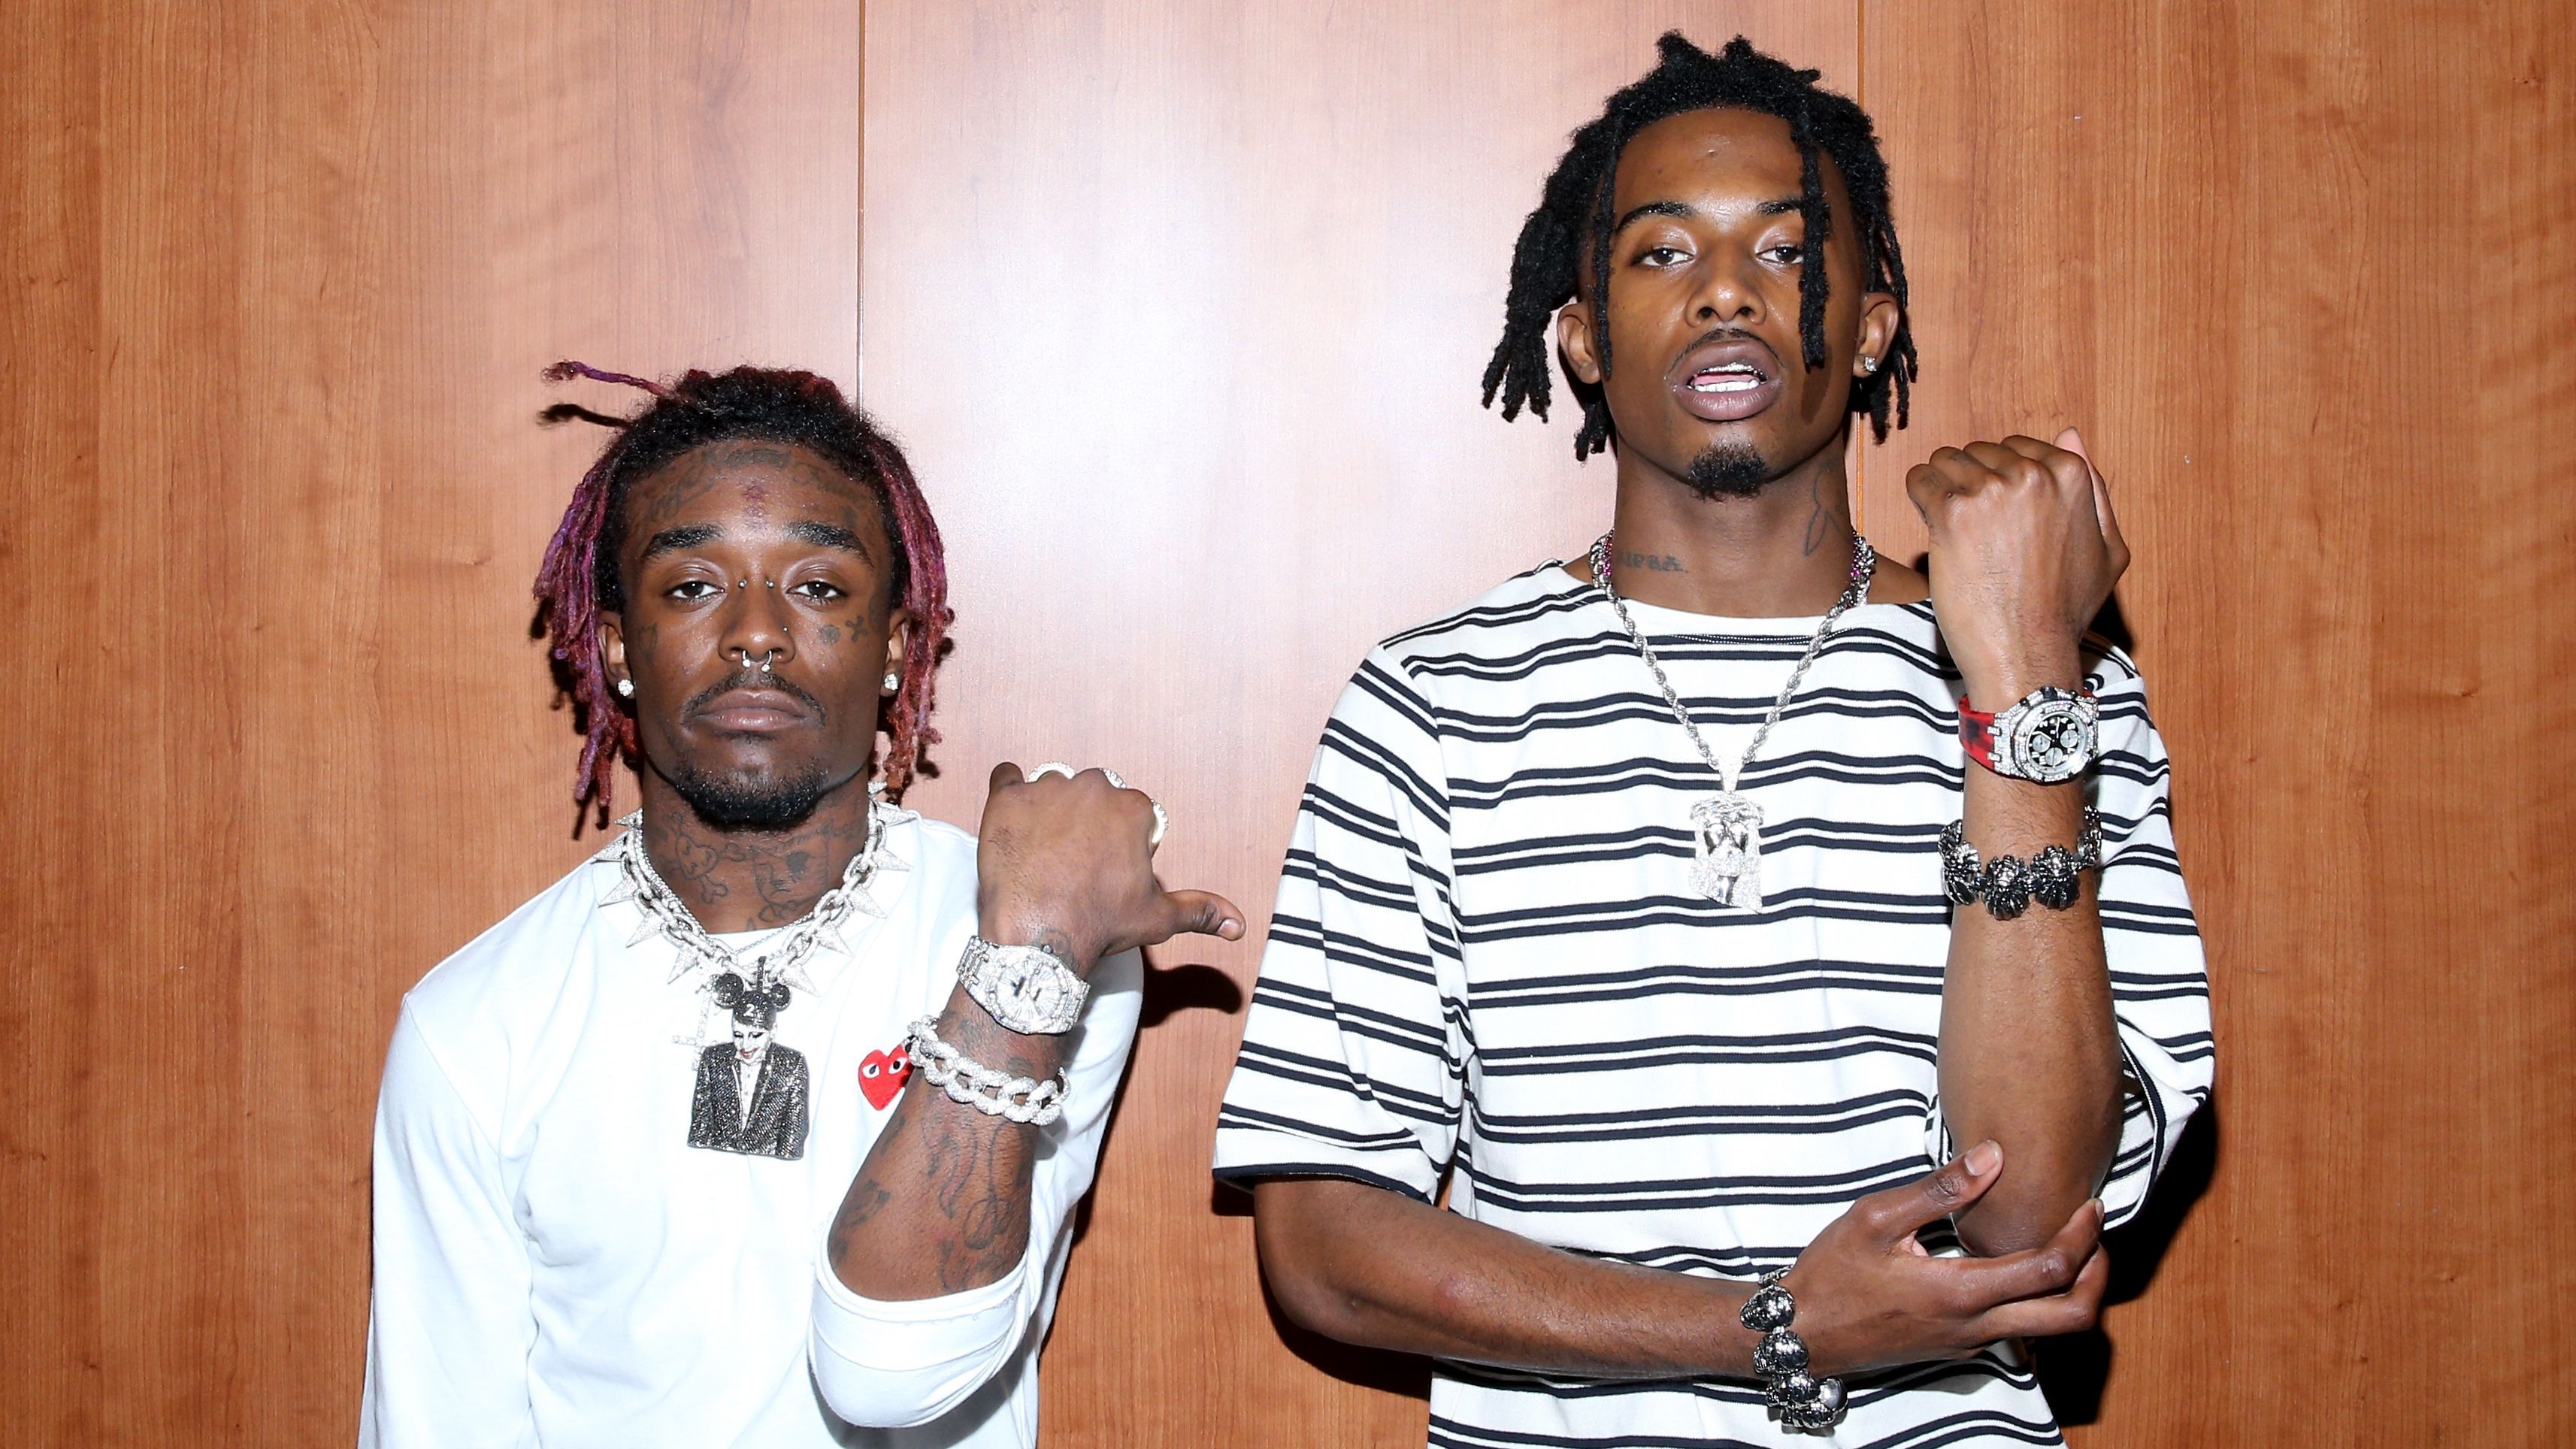 Lil Uzi Vert Explains Why He And Playboi Carti 'Physically Fight.